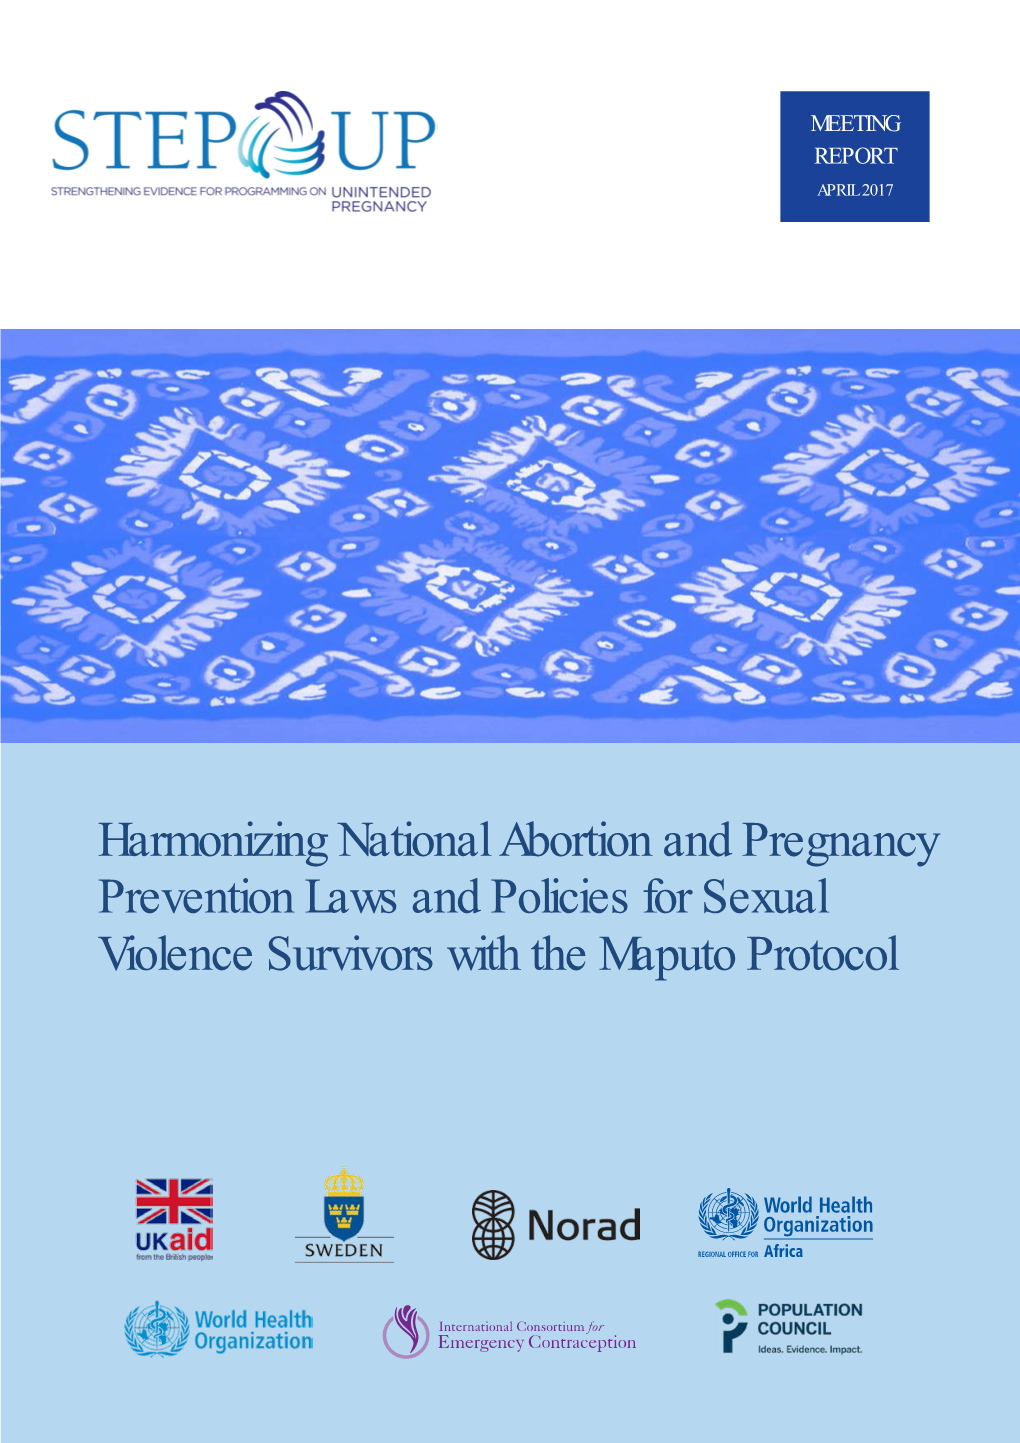 Harmonizing National Abortion and Pregnancy Prevention Laws and Policies for Sexual Violence Survivors with the Maputo Protocol